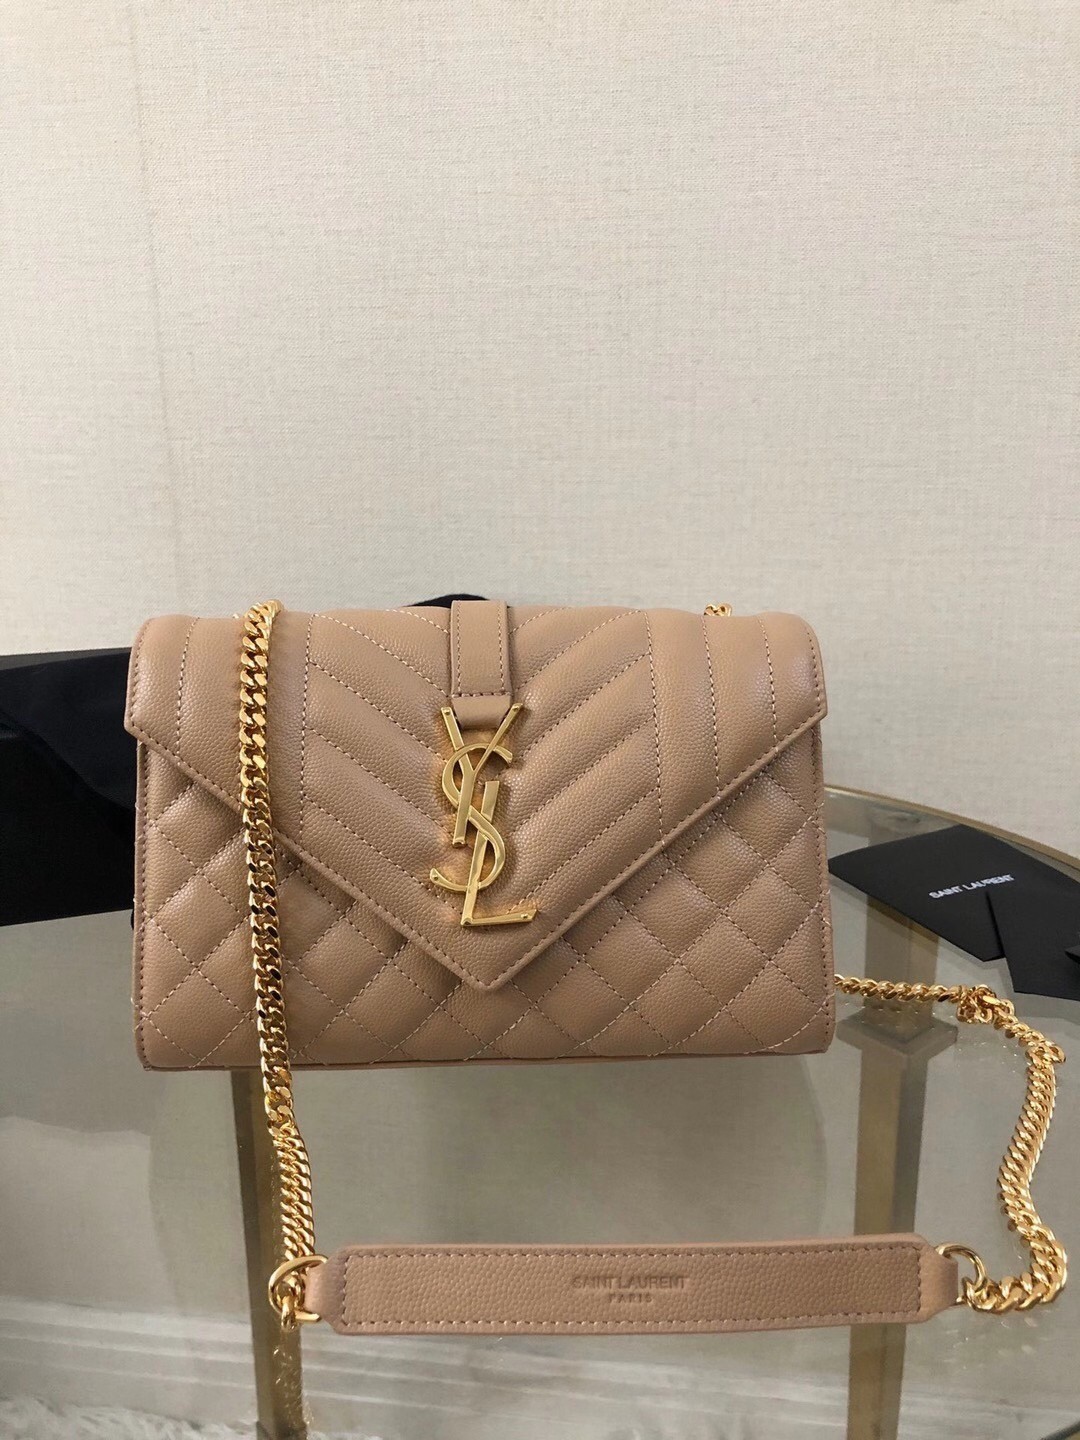 Saint Laurent Small Envelope Bag In Beige Grained Leather 242